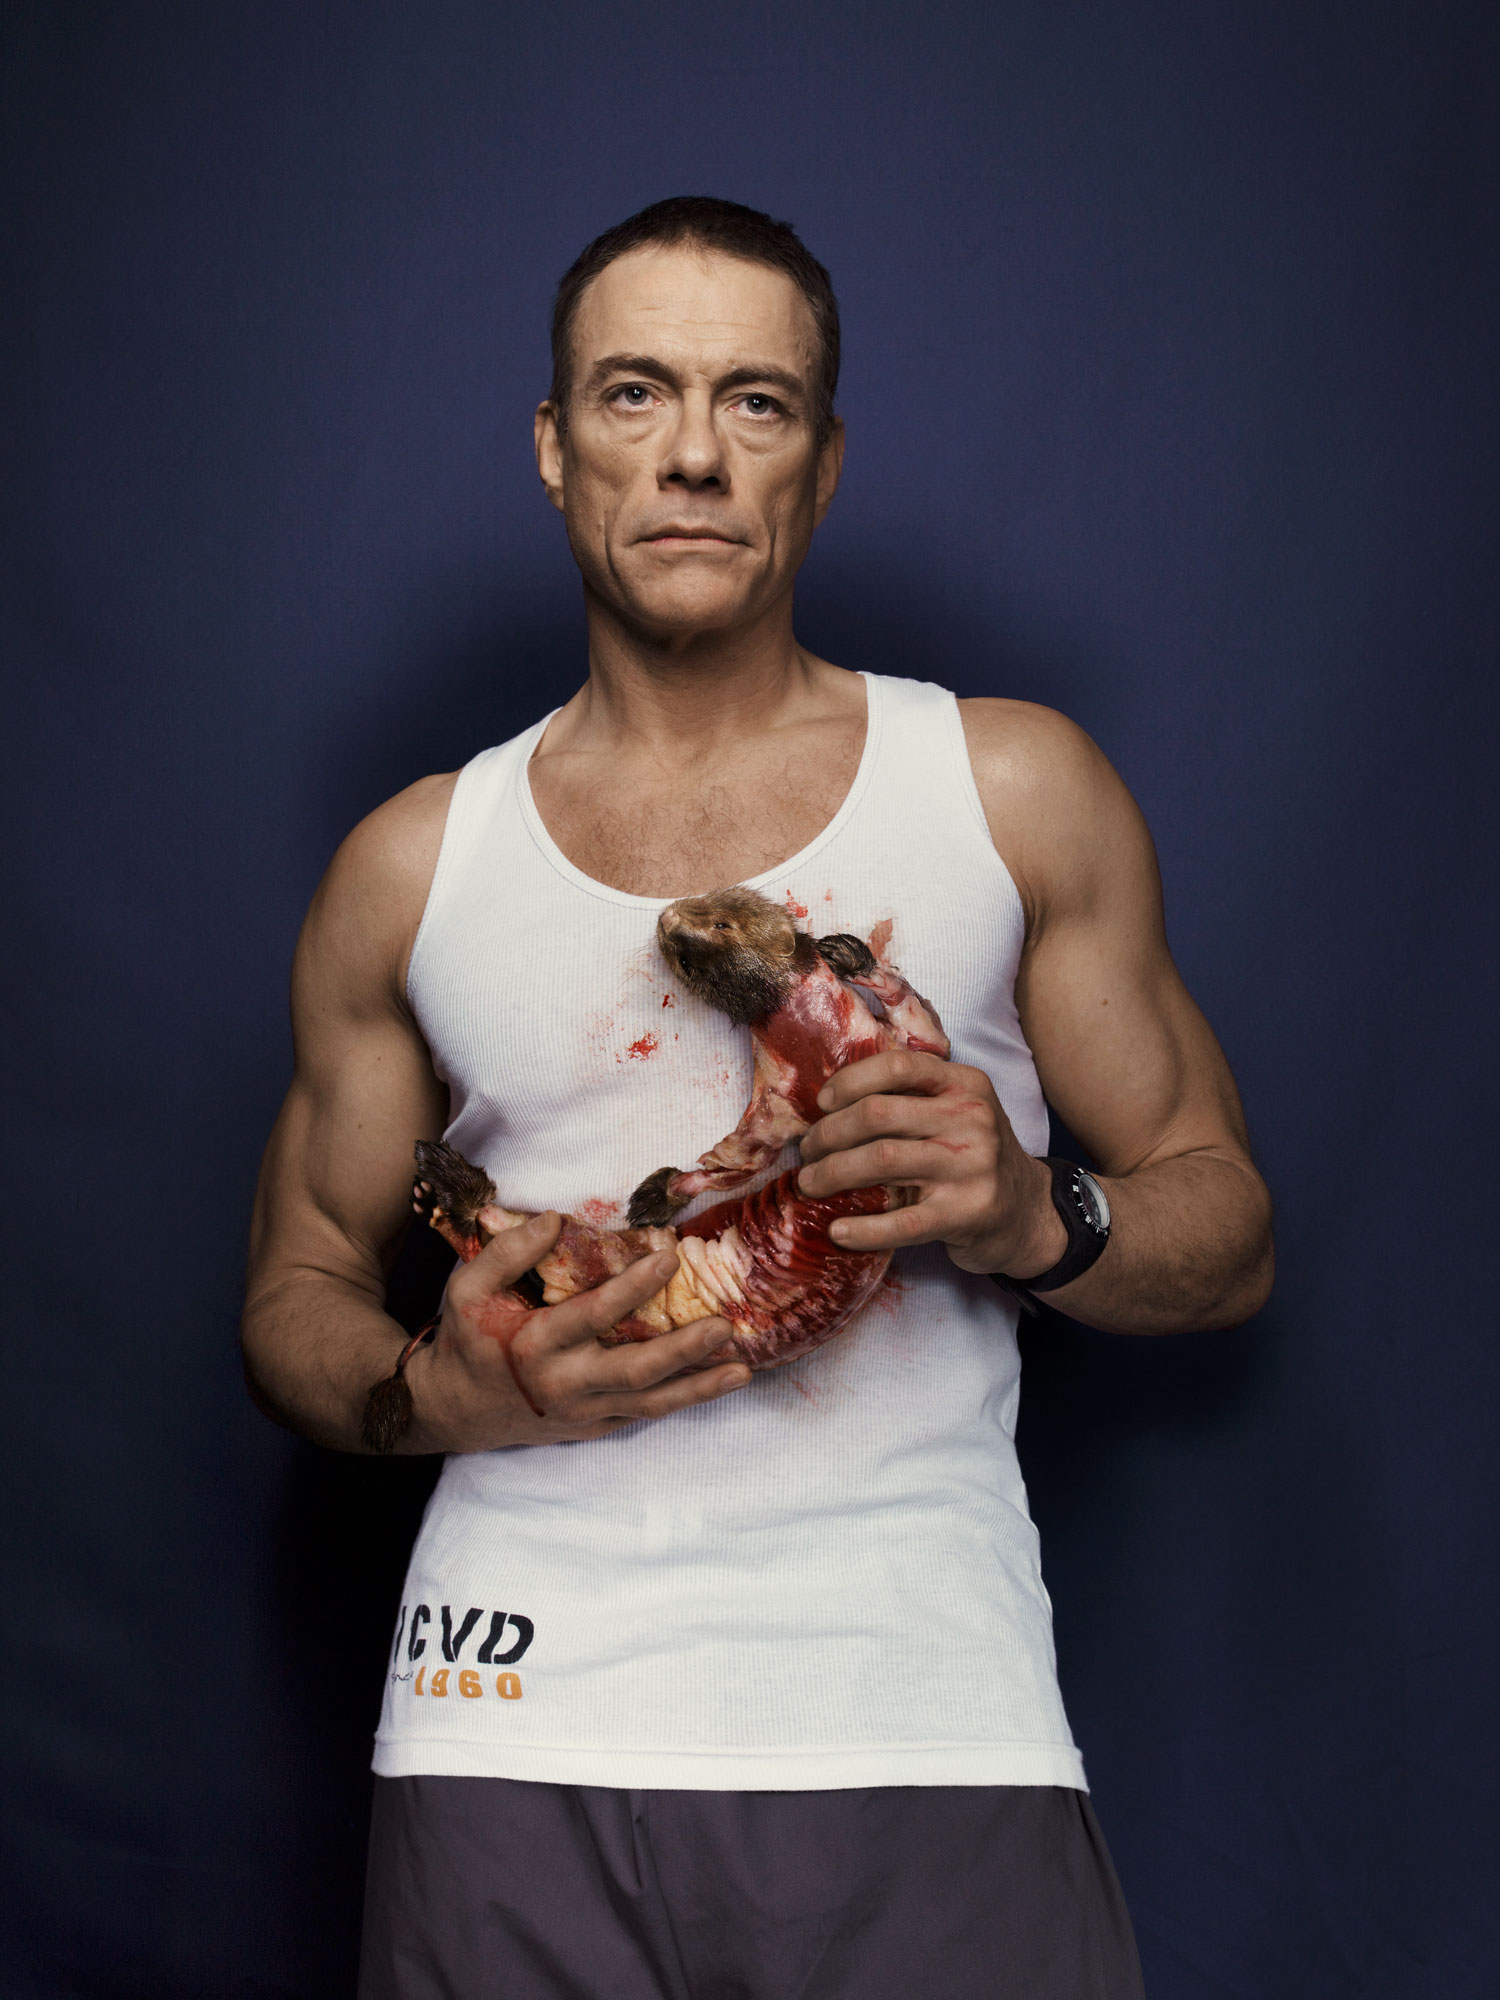 Photo shoot for the cover of Jean Claude Vandamme's "The Victims". A documentary protesting the fur industry, which toured Belgium in 2011